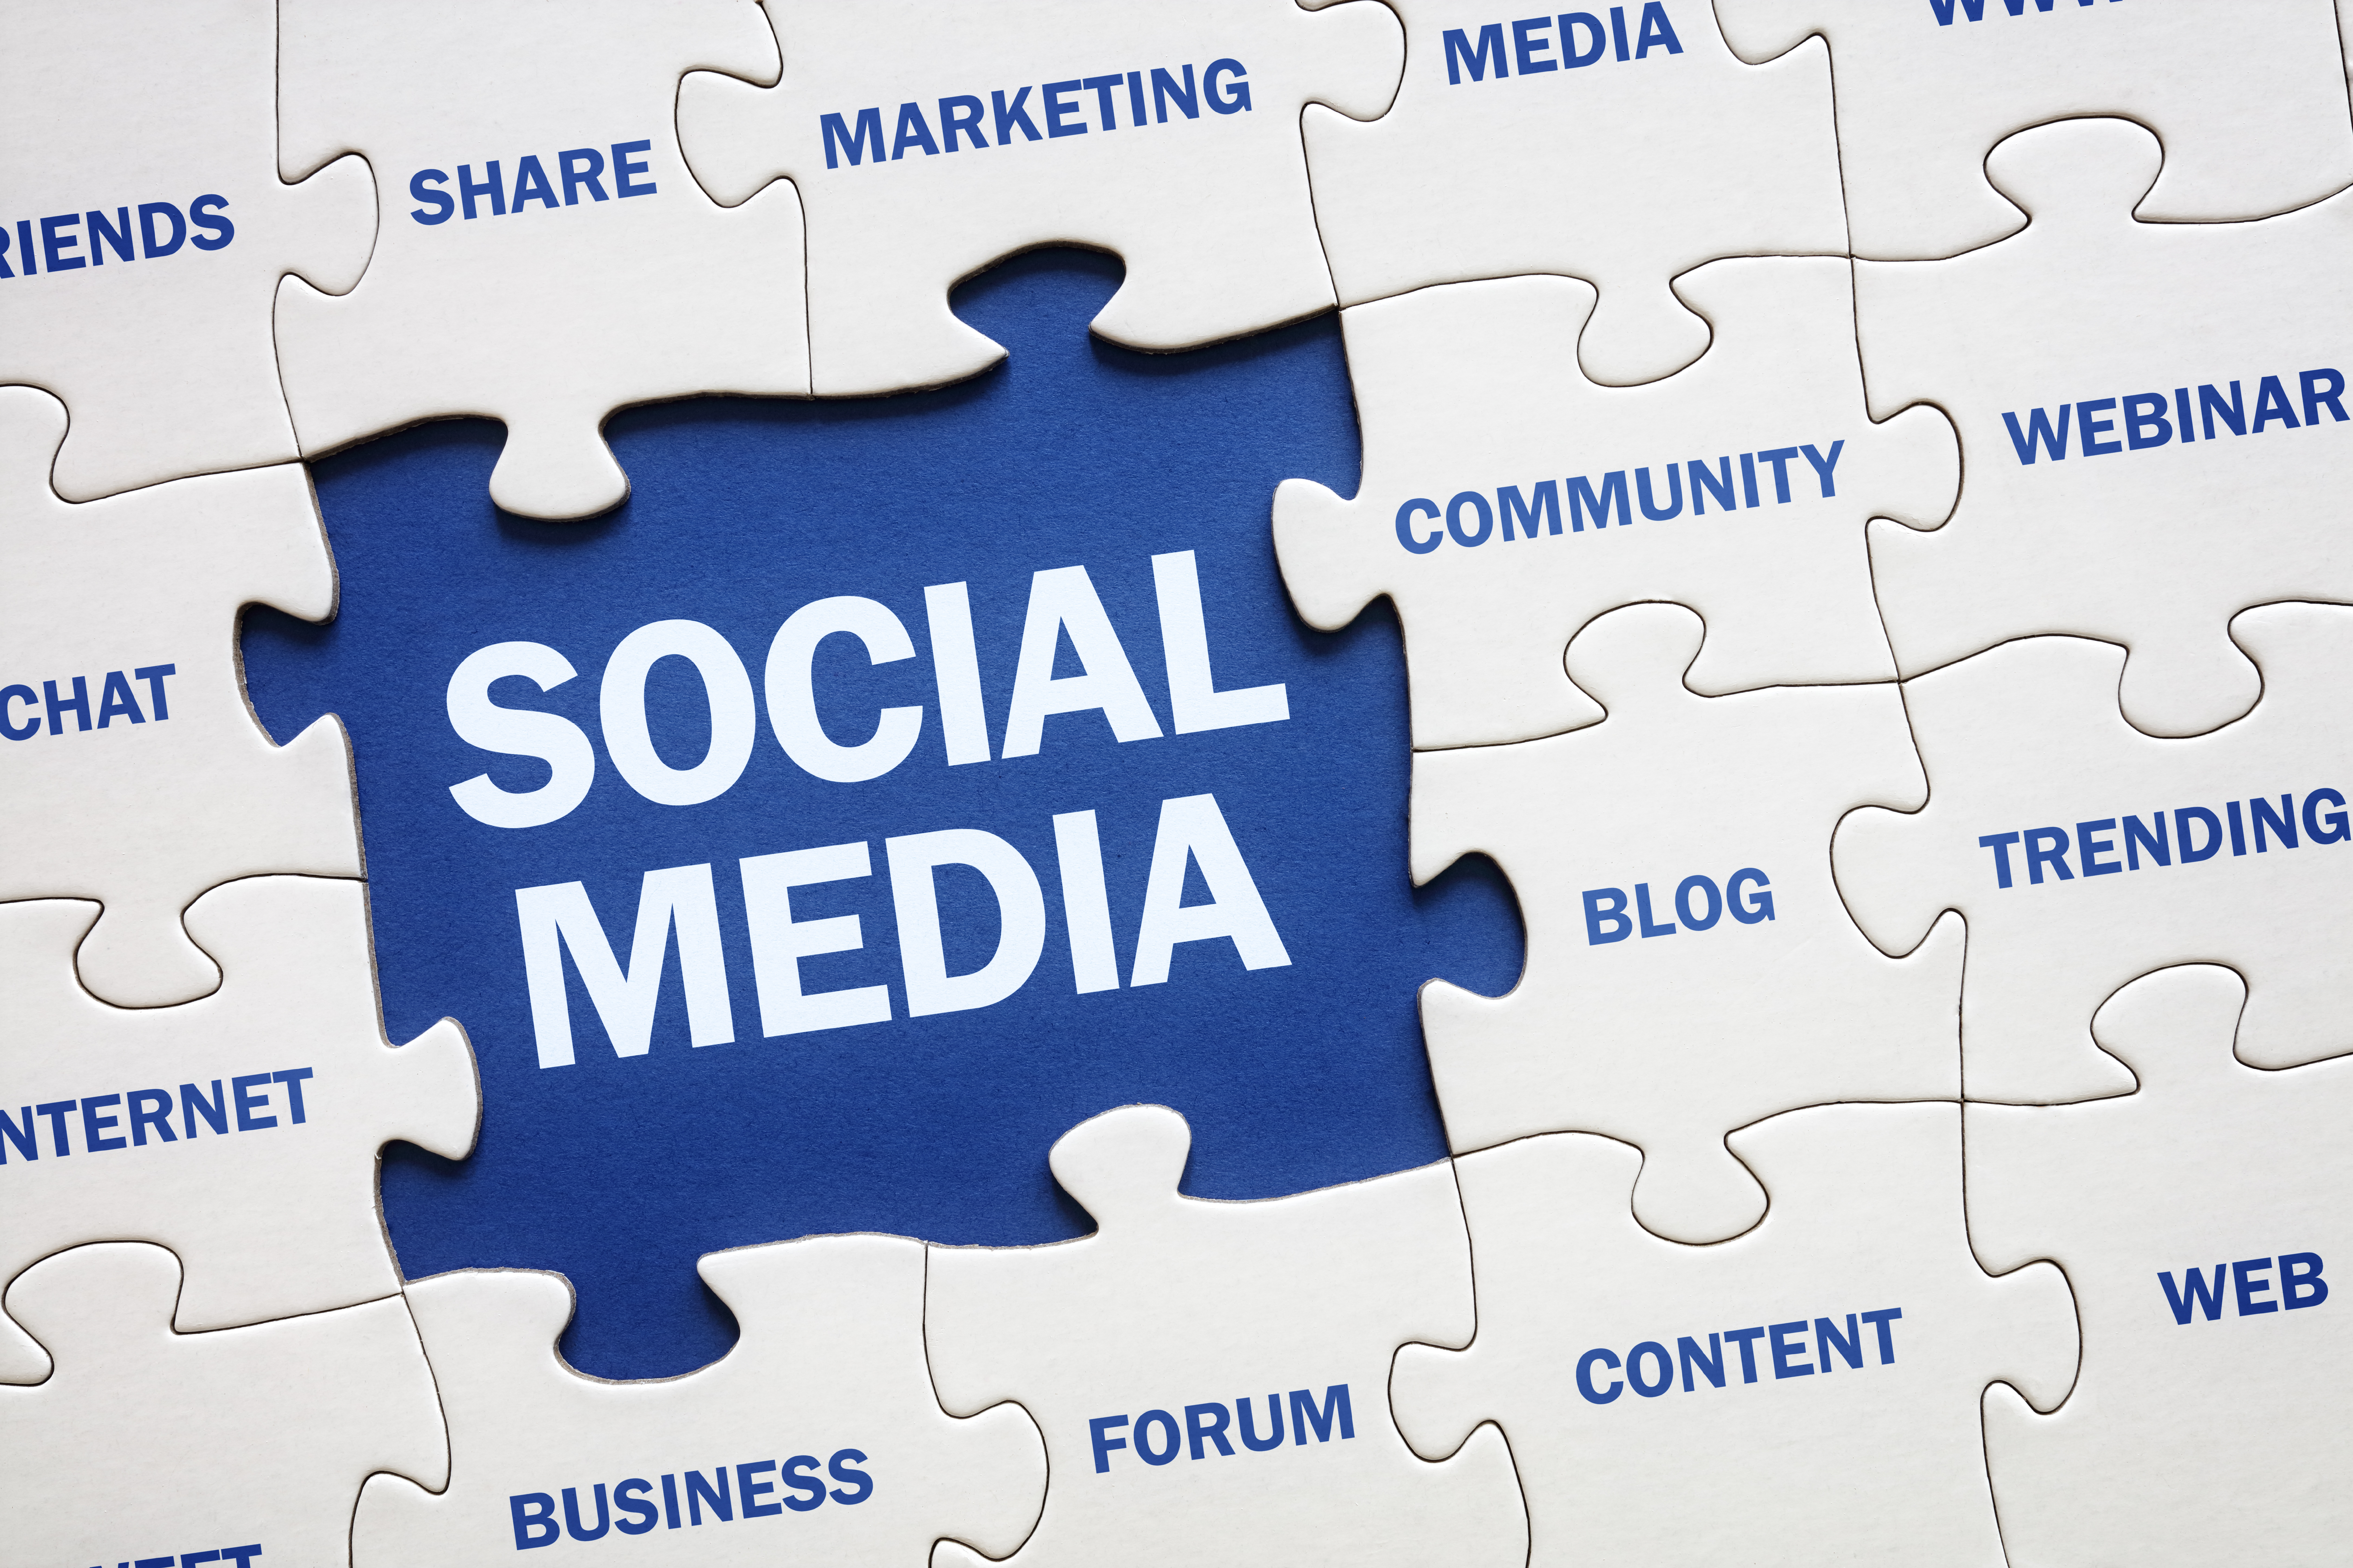 What Good is Social Media for Business?